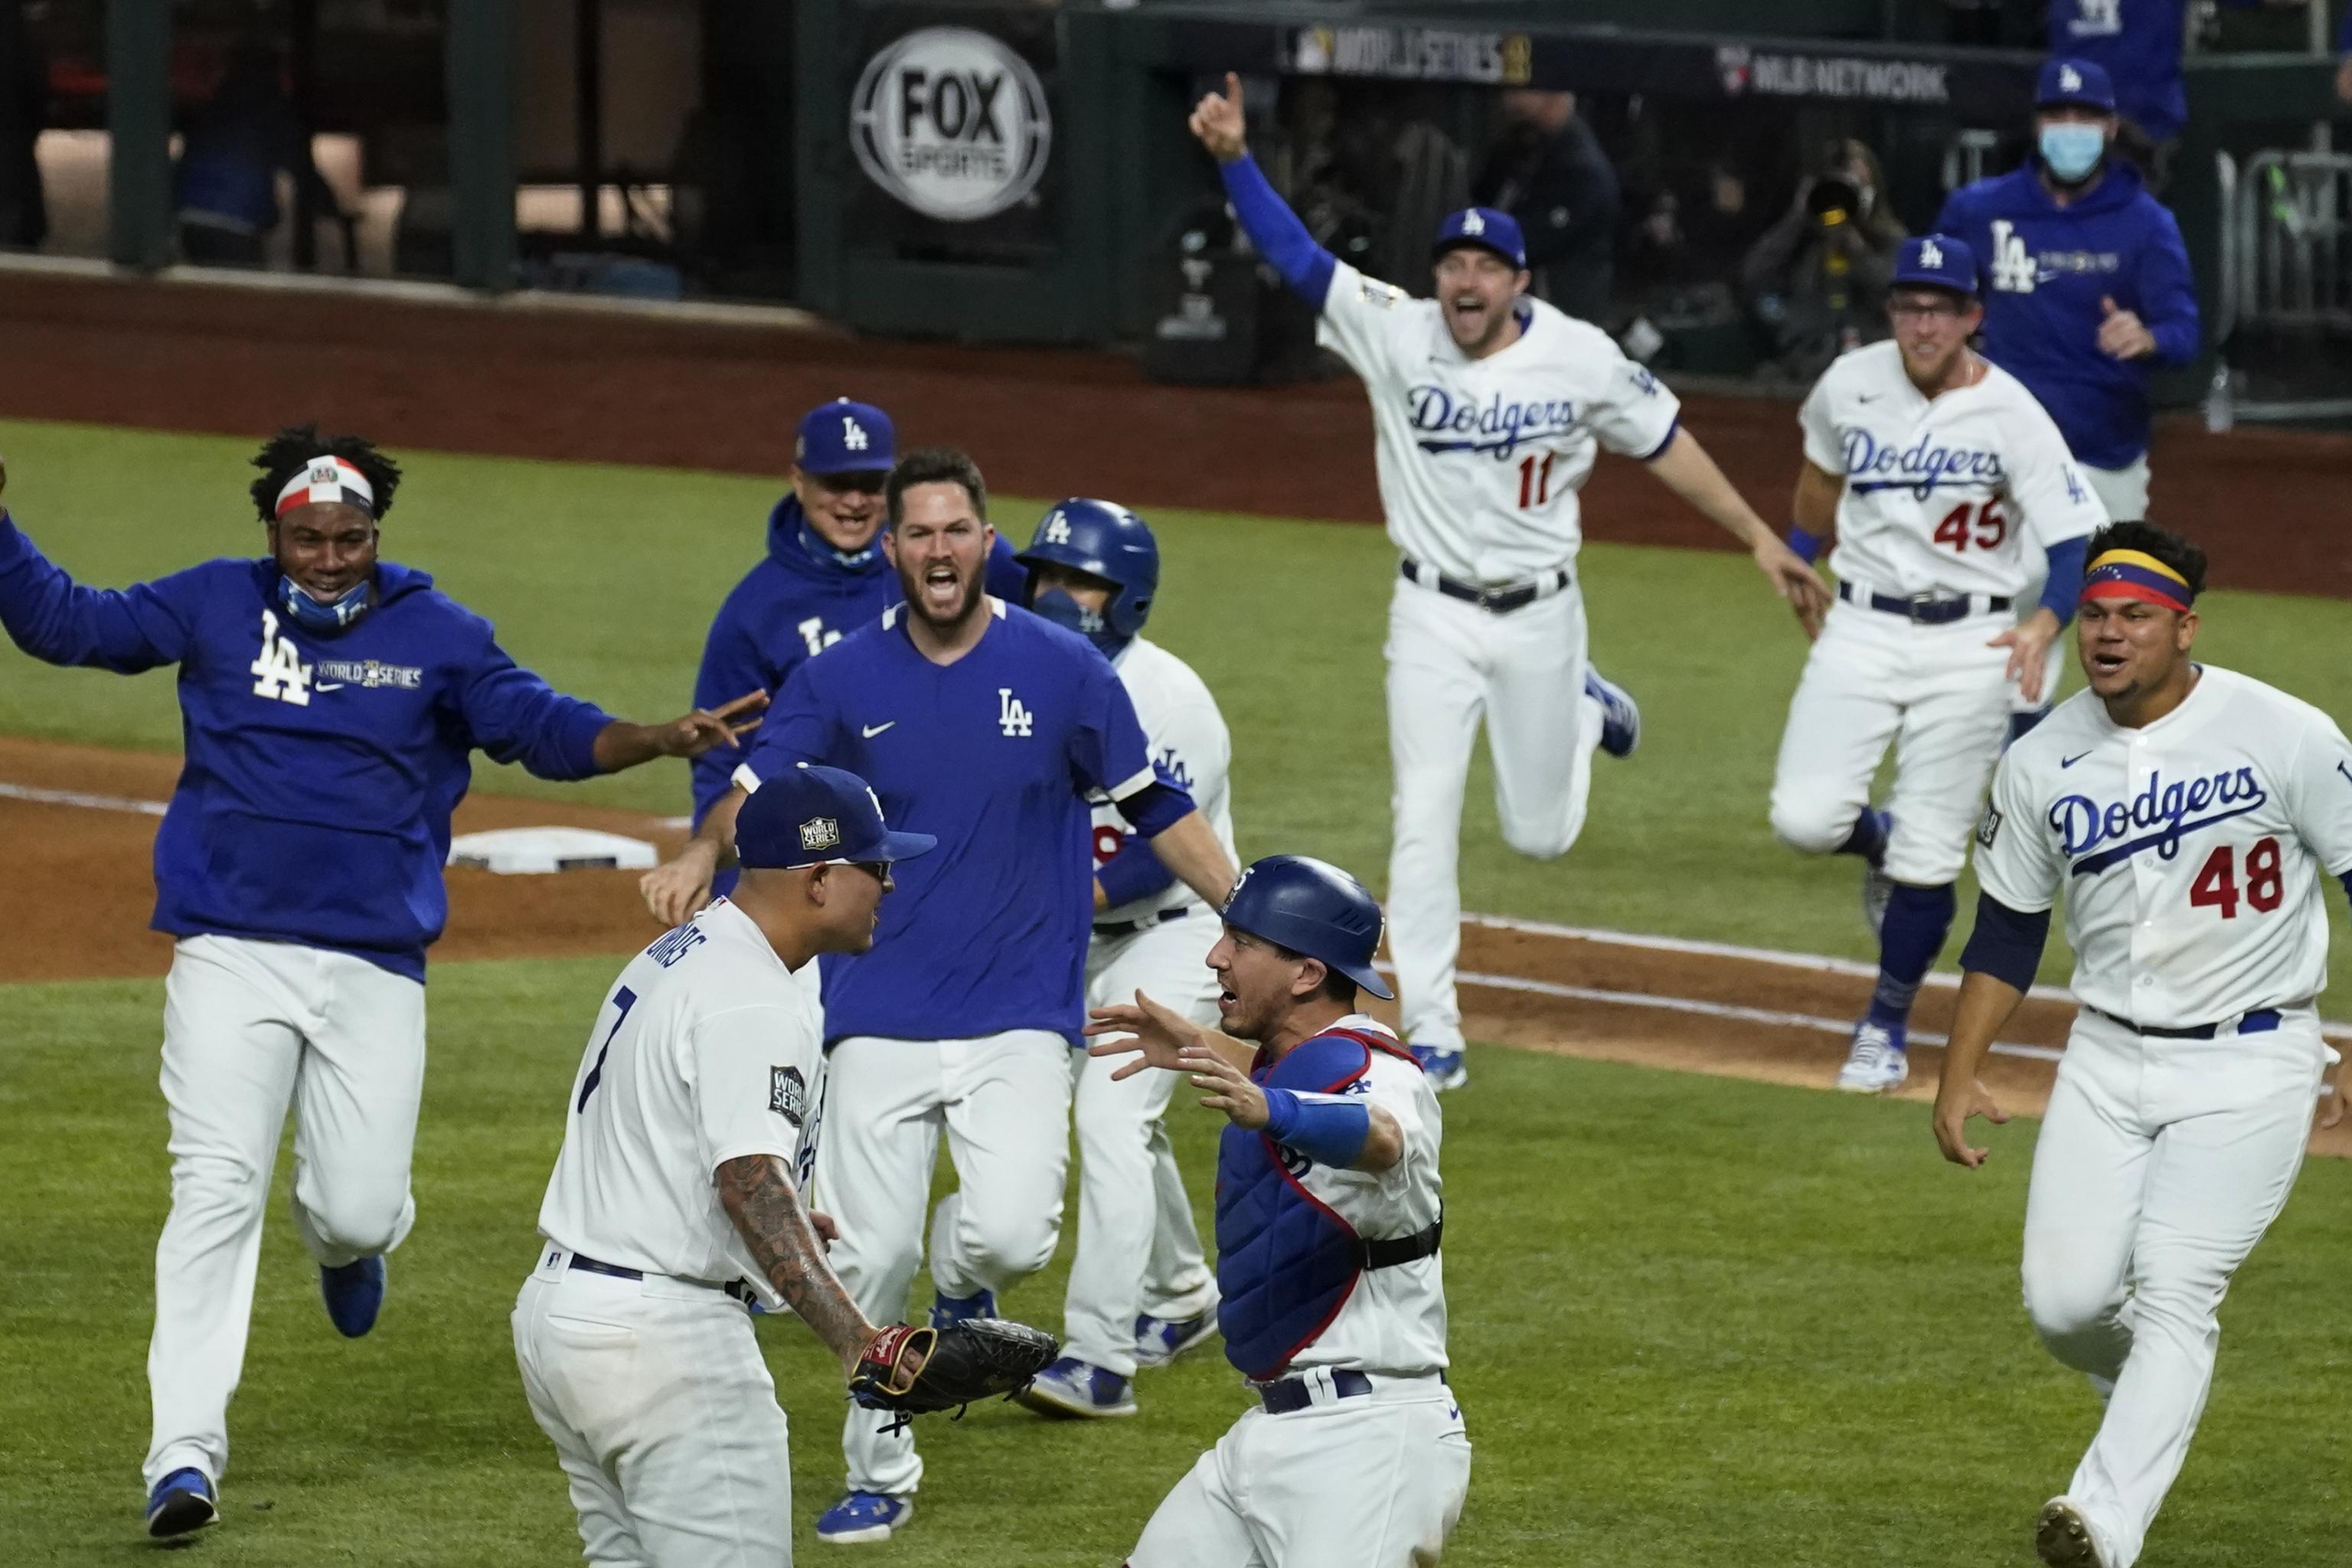 Top 10: Longest Dodger home runs of 2020, by Cary Osborne